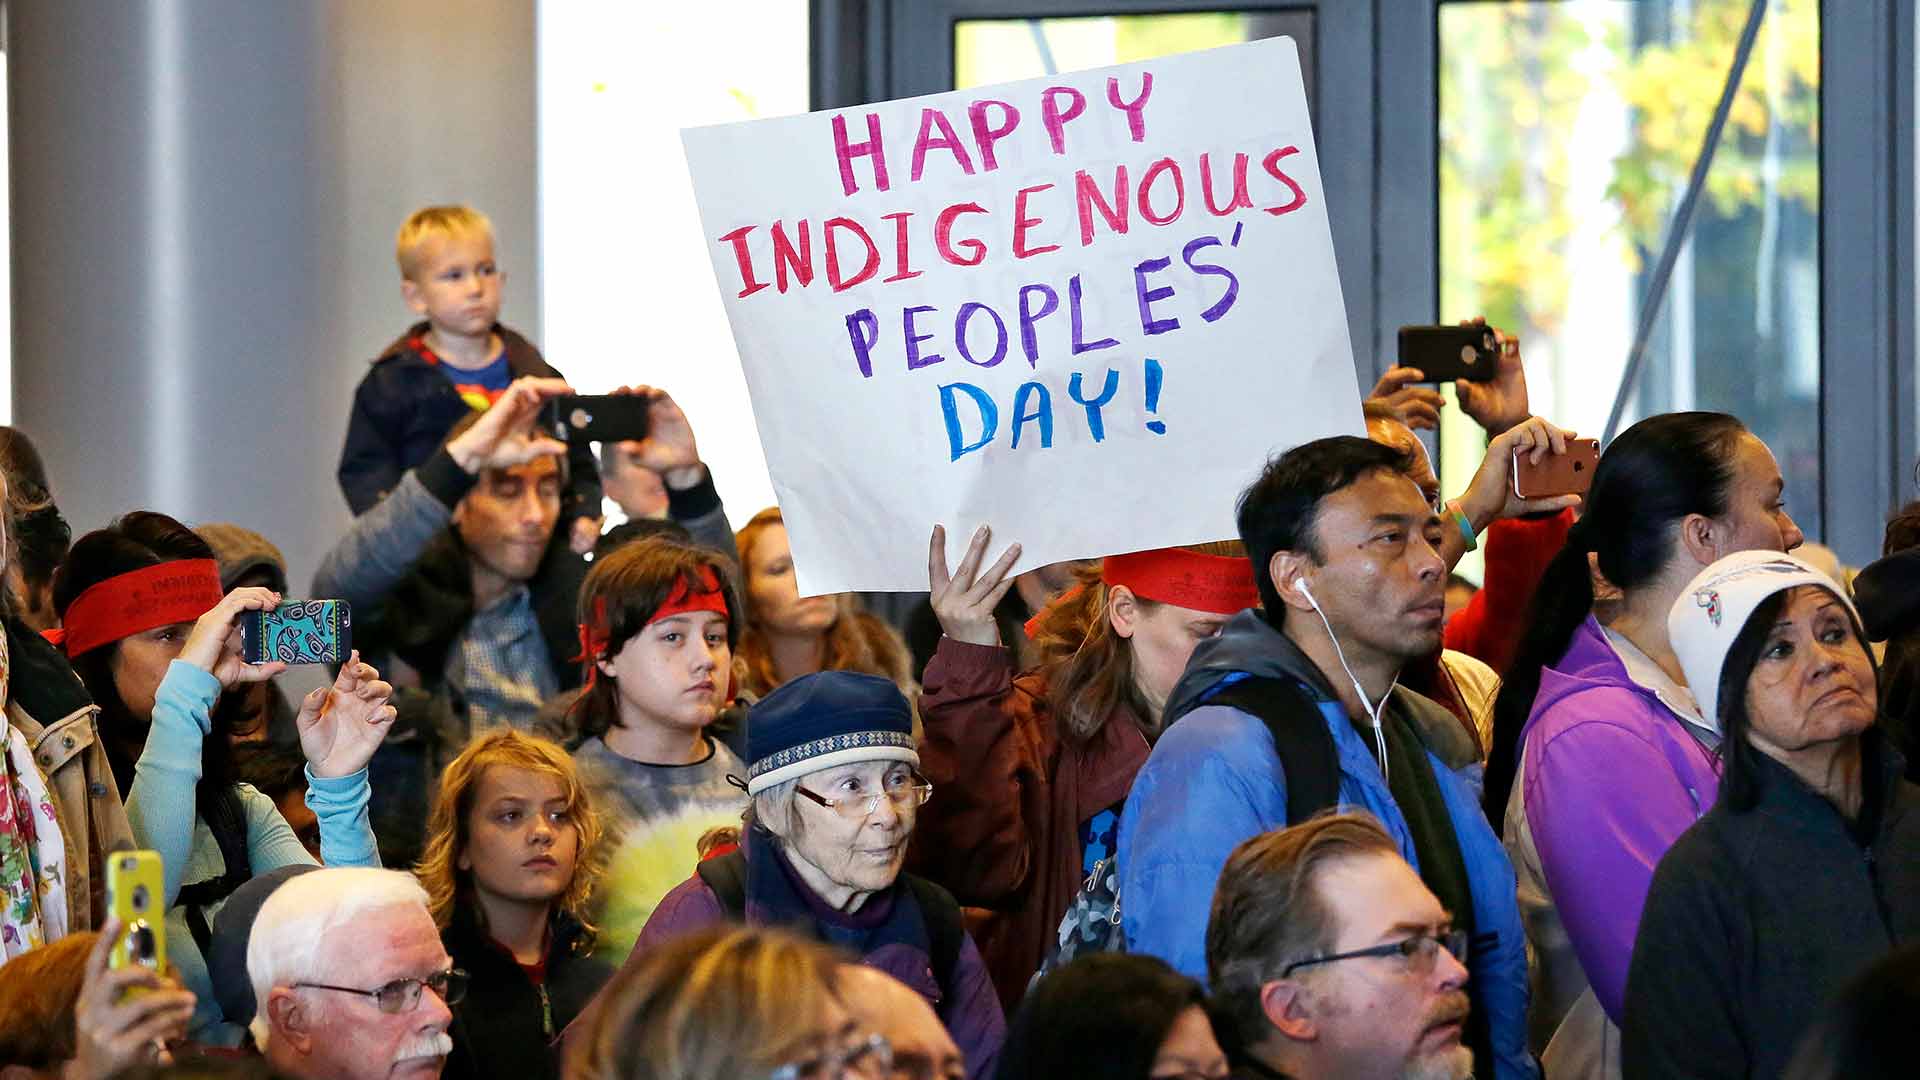 People look on at a celebration of Indigenous Peoples’ Day Monday, Oct. 10, 2016, at Seattle's City Hall. Seattle began observing Indigenous Peoples’ Day in 2014 to promote the well-being and growth of Seattle’s American Indian and Indigenous community. (AP Photo/Elaine Thompson)